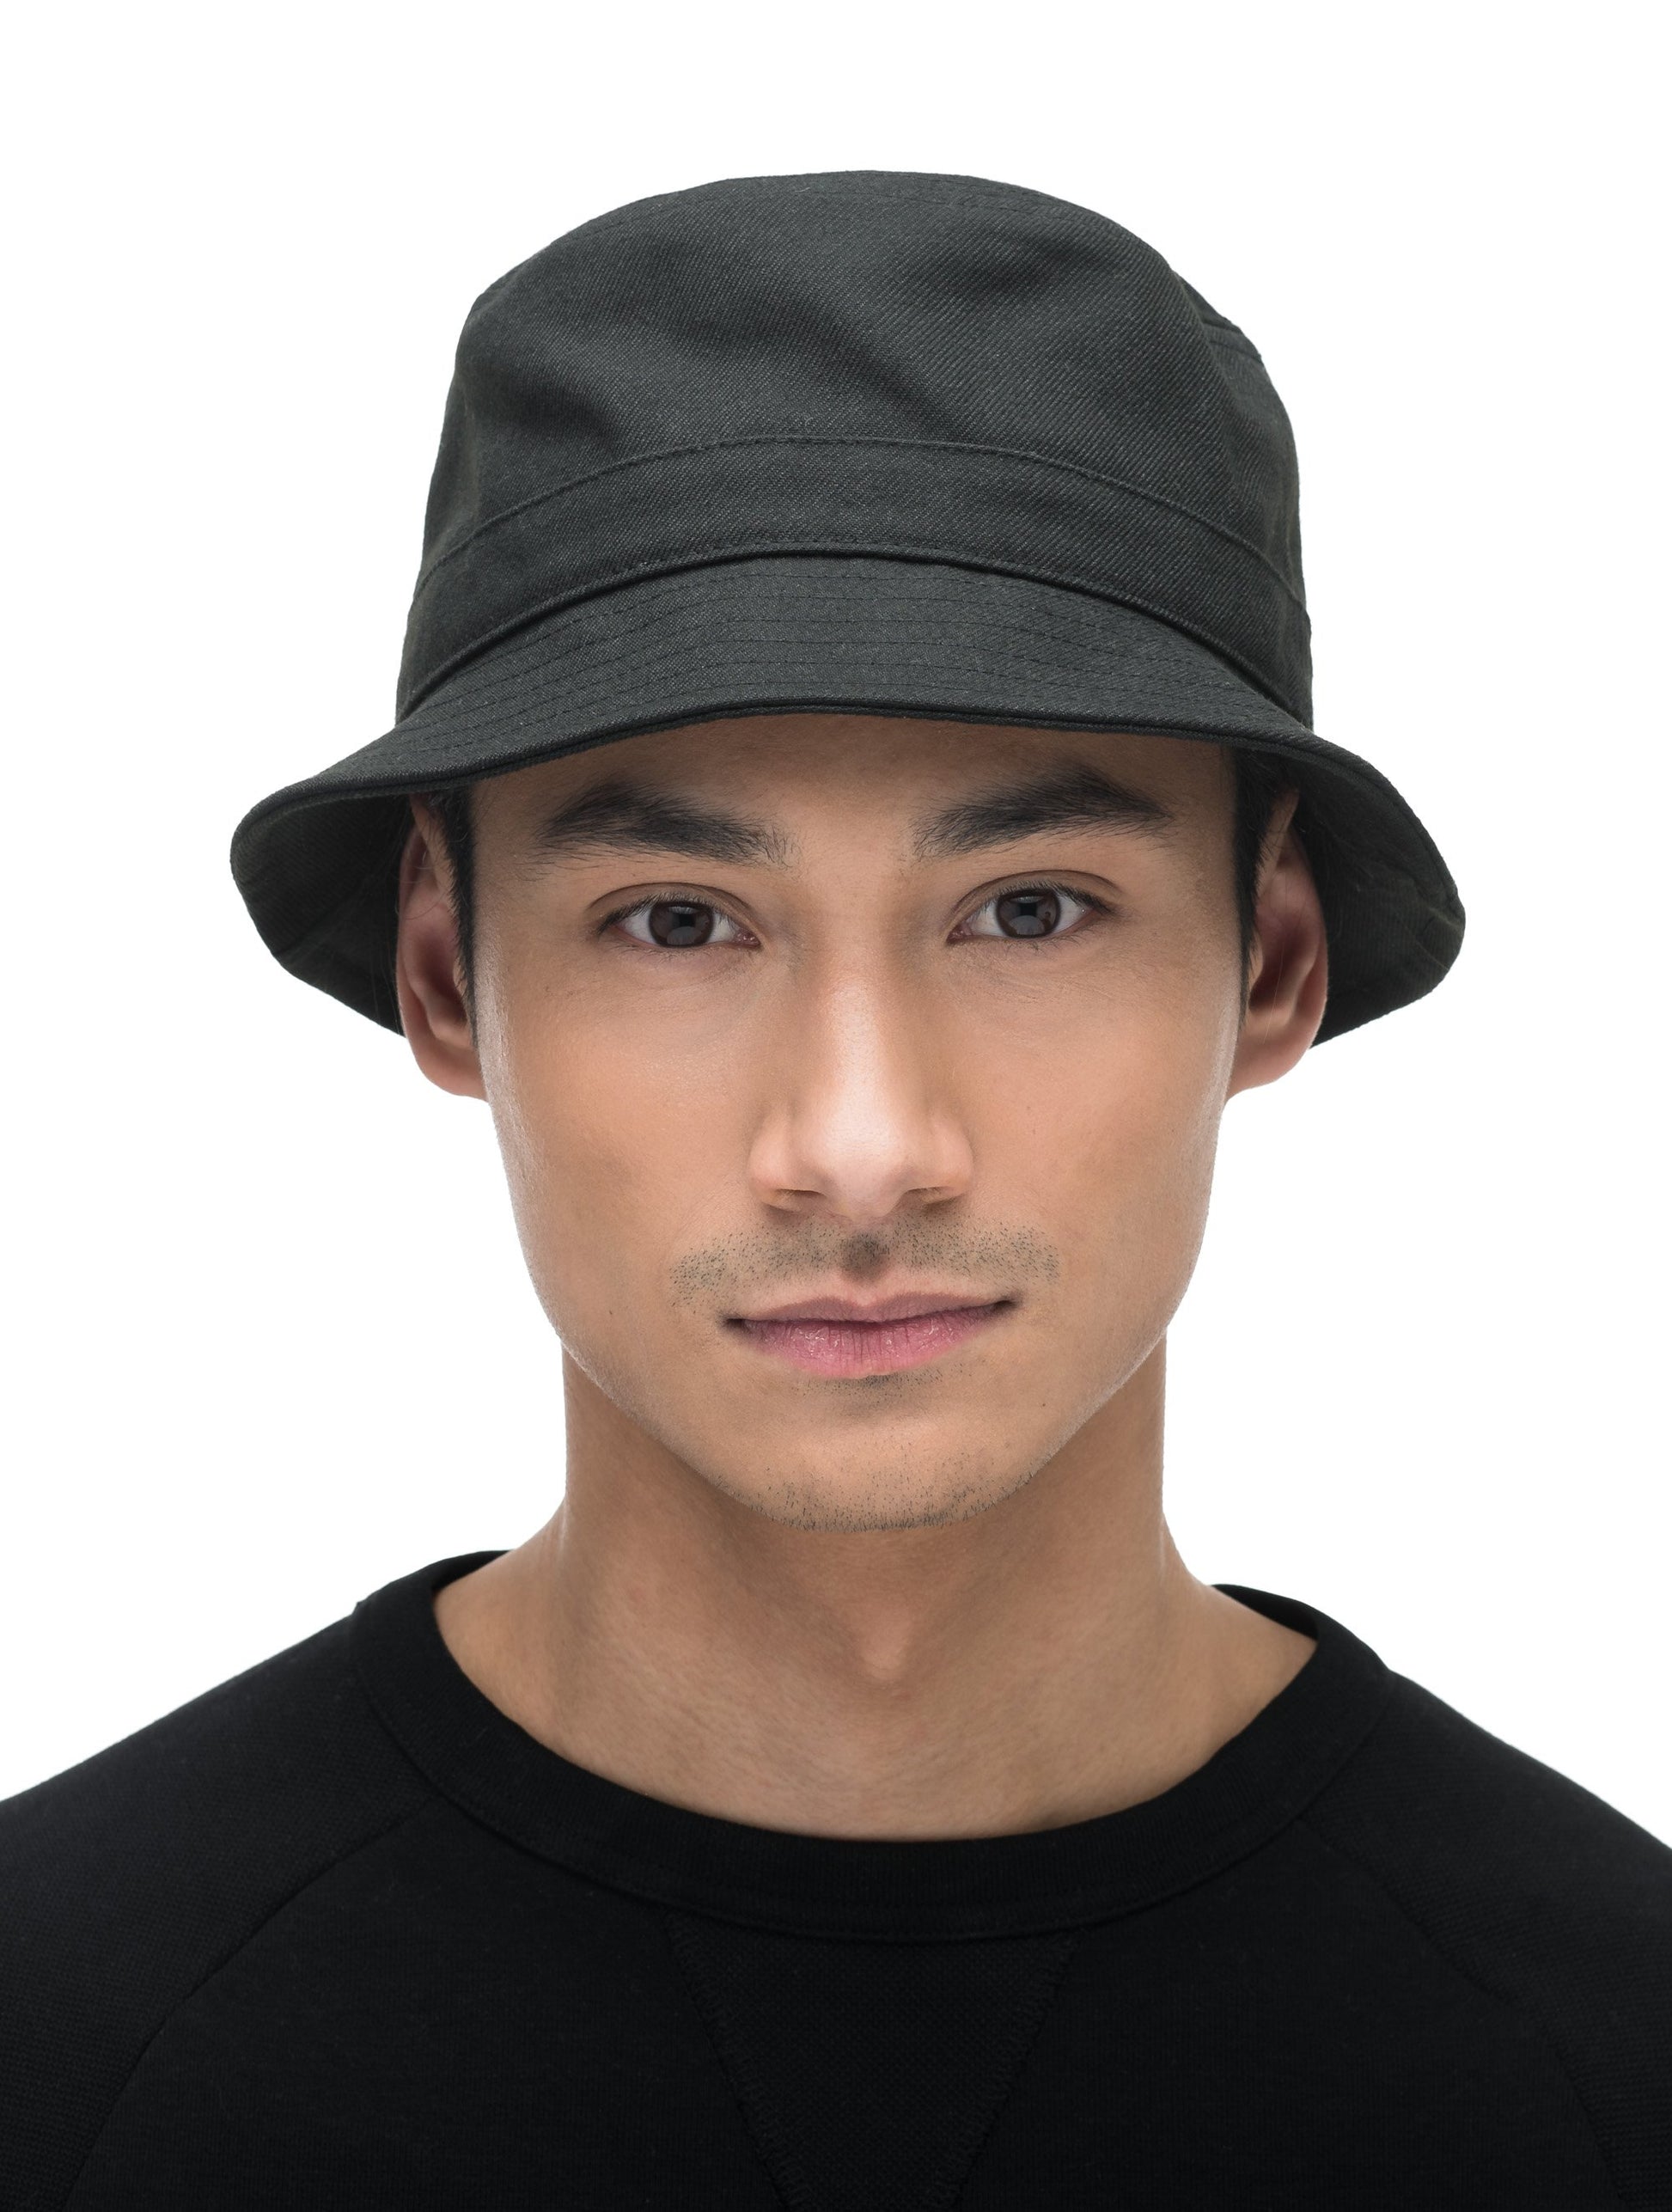 Unisex bucket hat with flat crown top and stitching detail on brim in Black